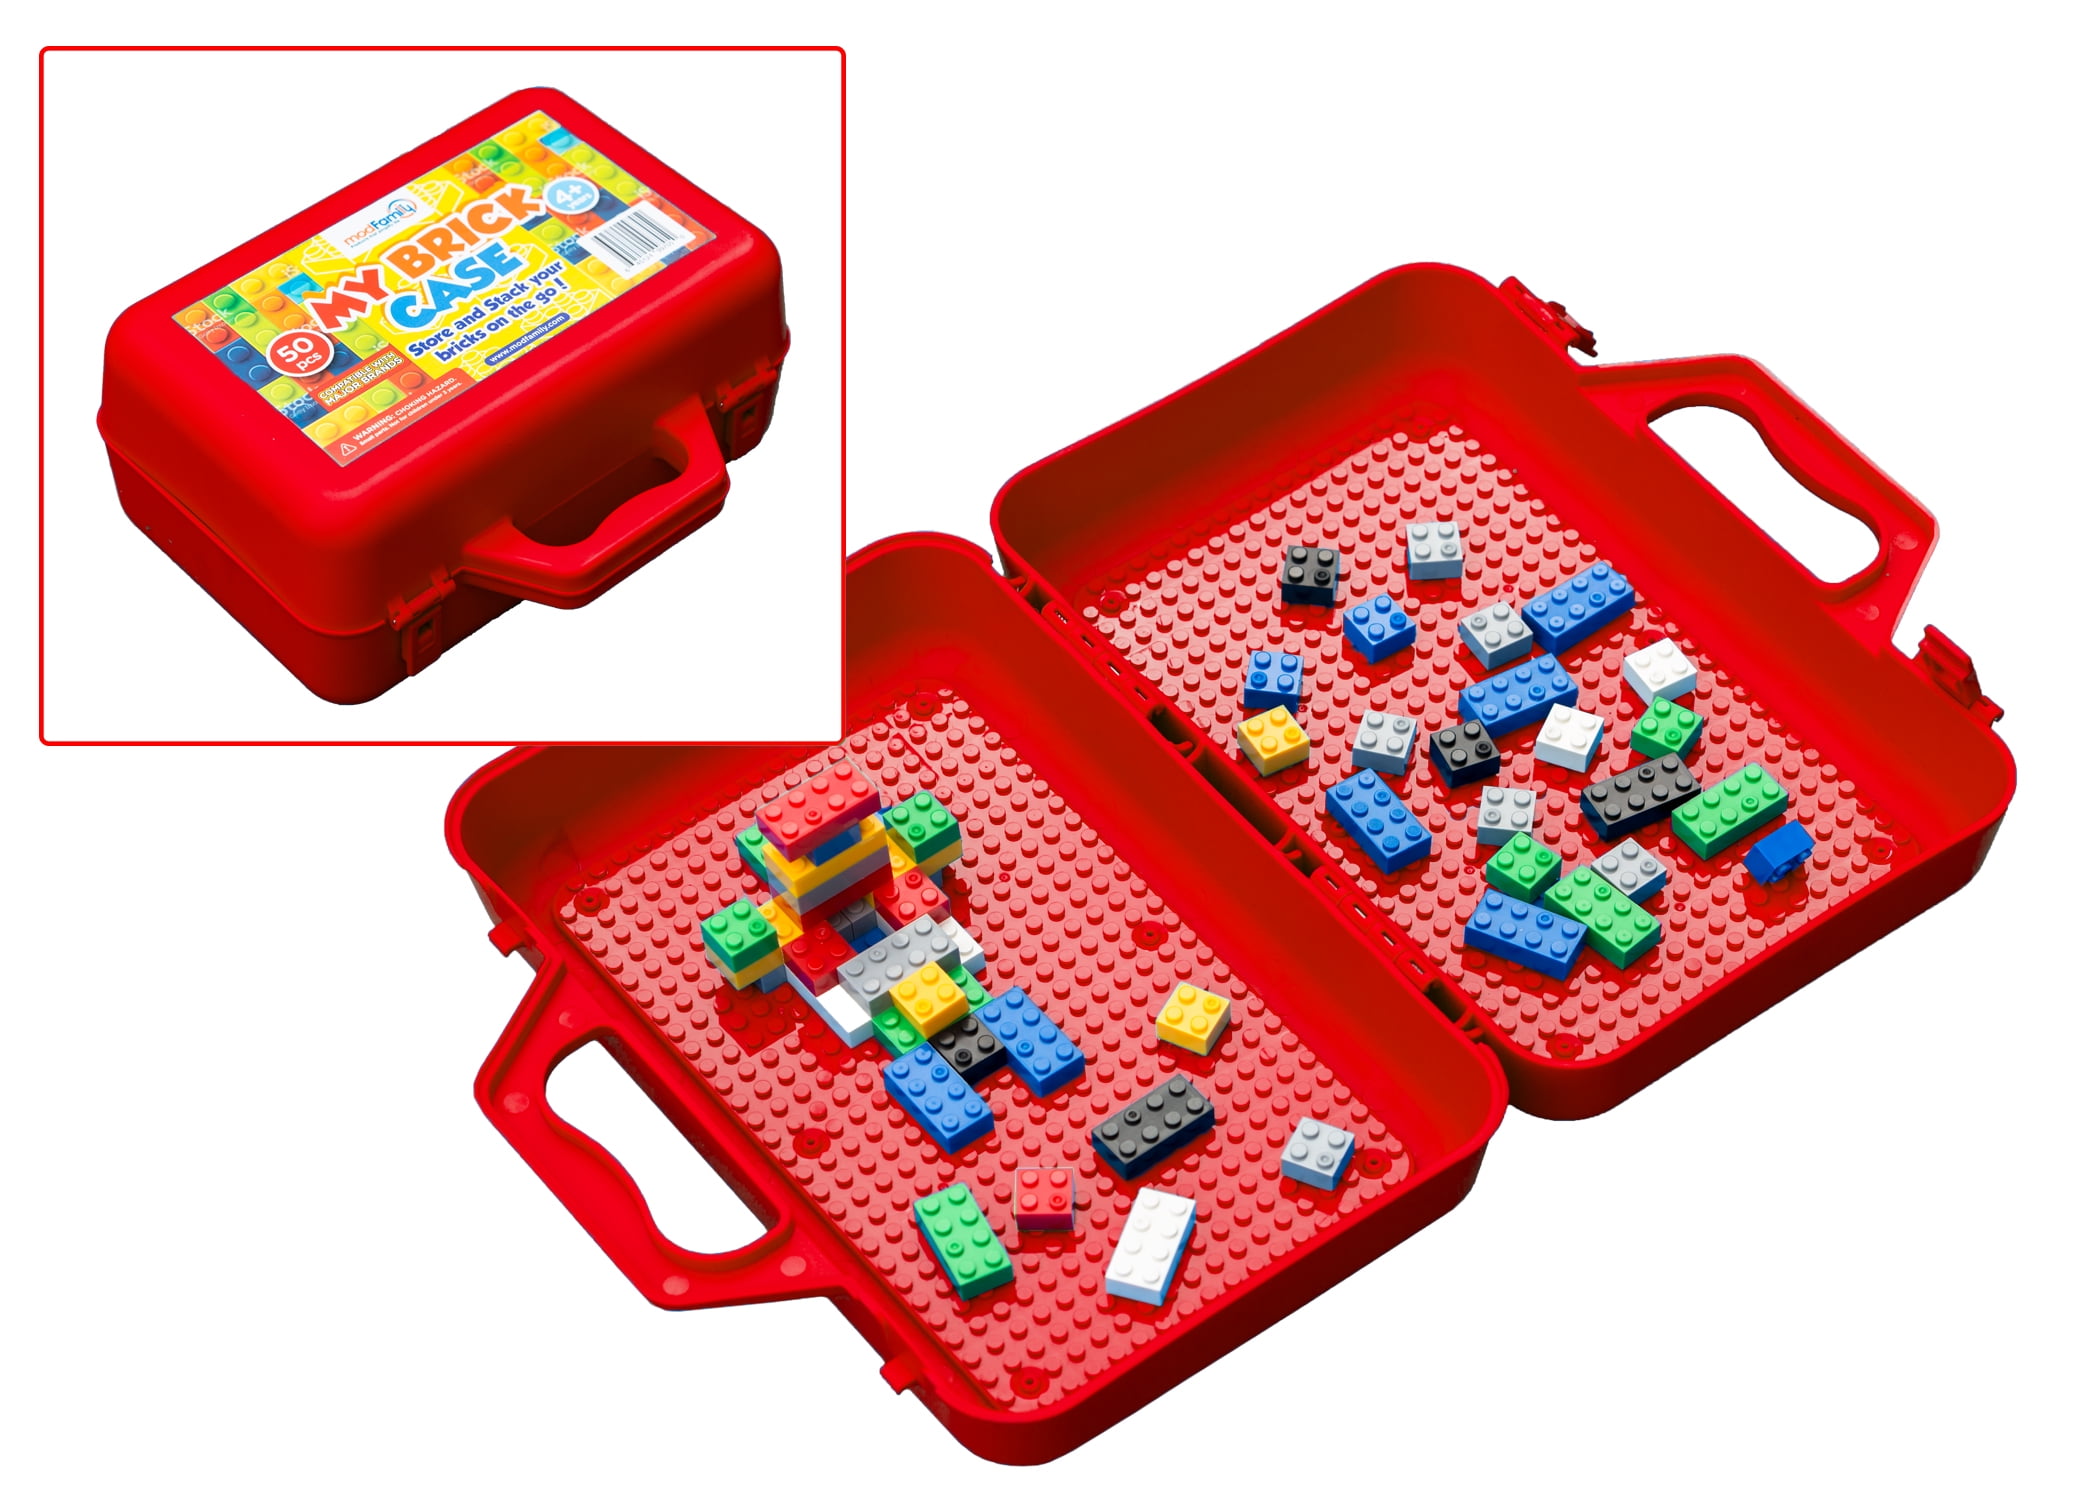 Portable Lego Brick Carrying Case with Building Base Plate Toy Box